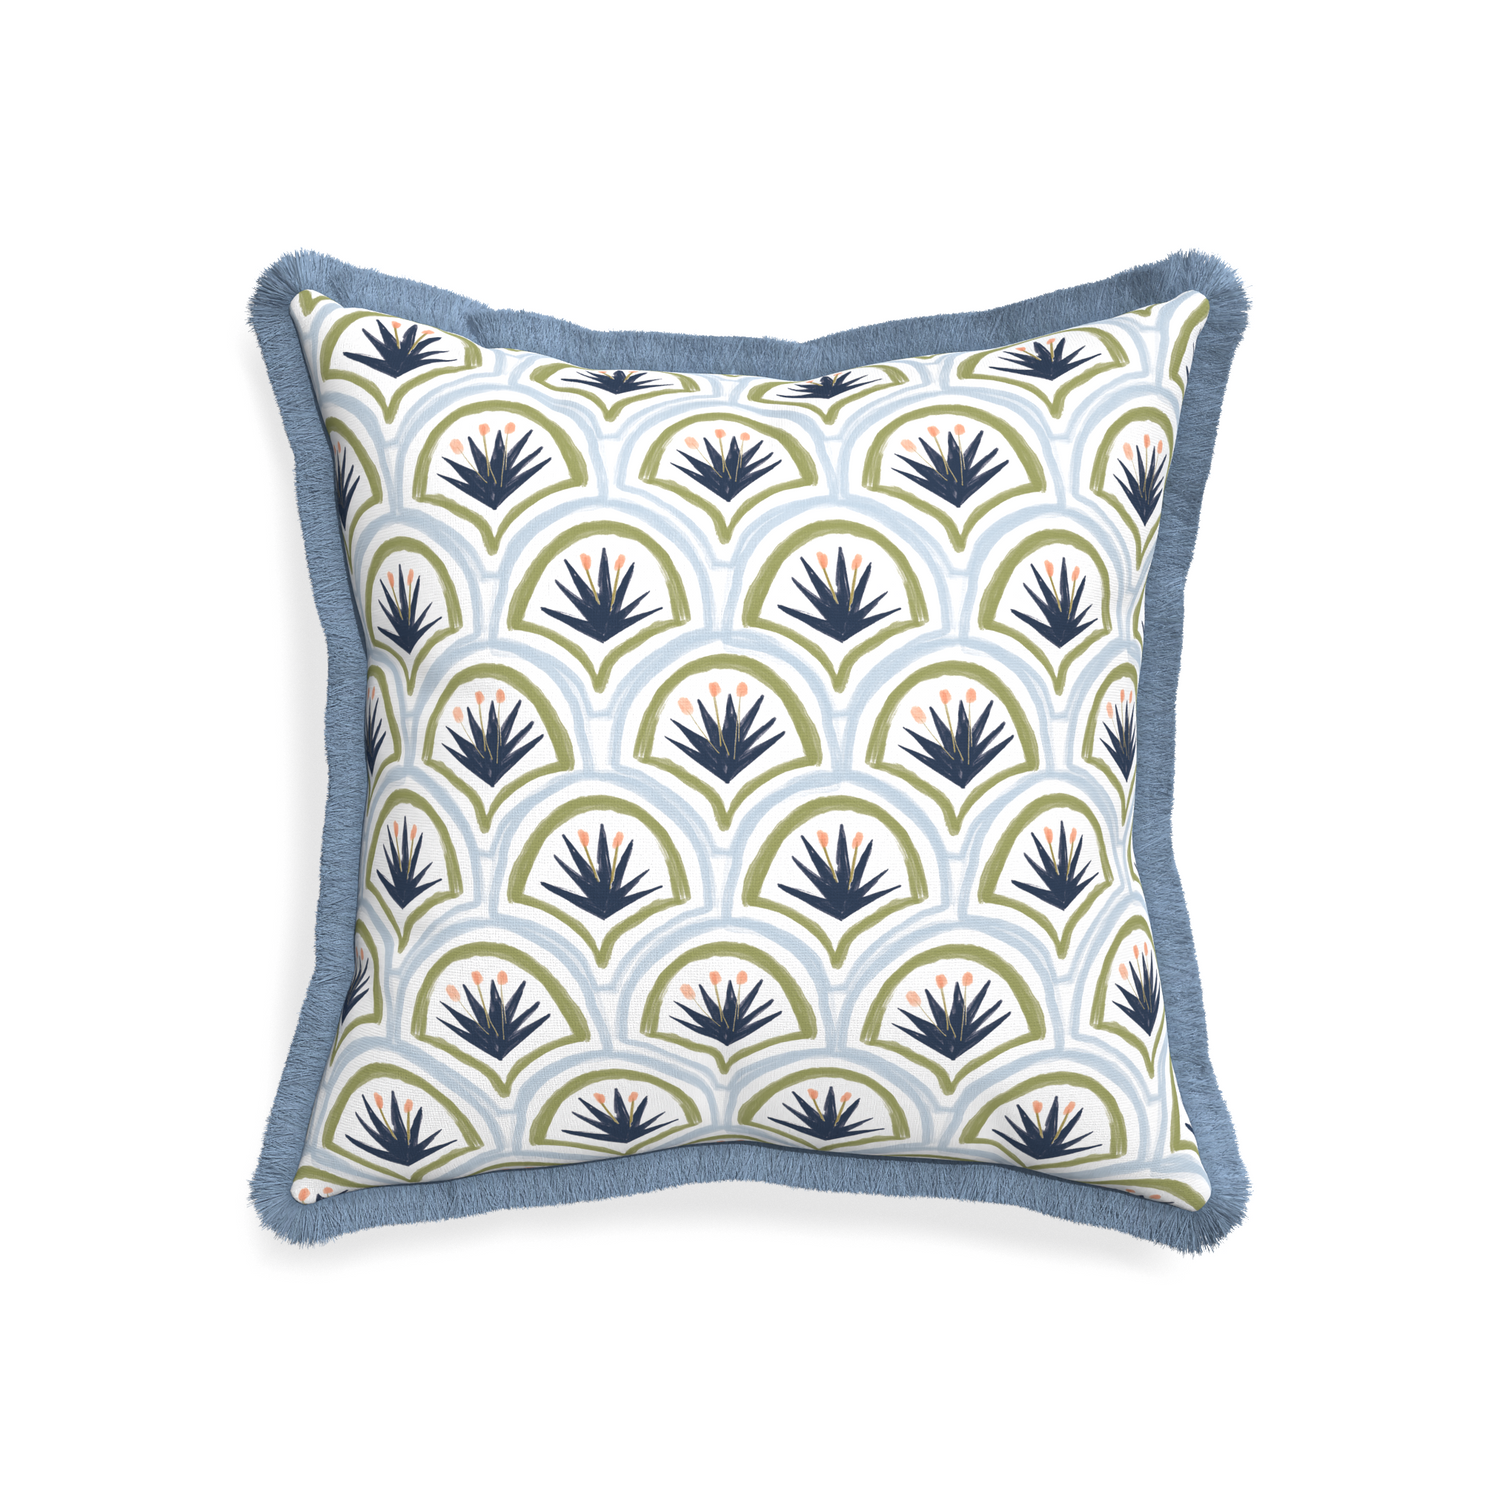 20-square thatcher midnight custom art deco palm patternpillow with sky fringe on white background